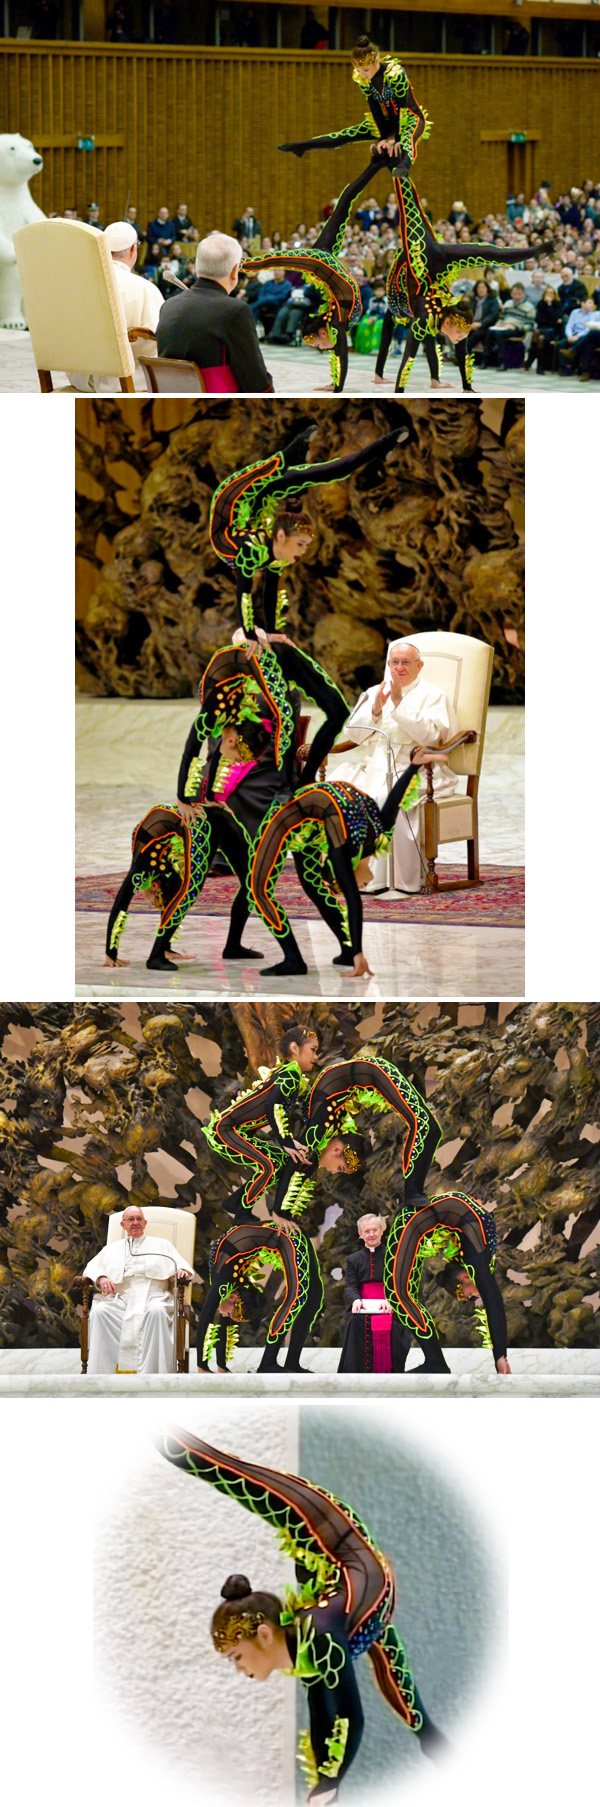 Photo collage of the 2017 Vatican Christmas circus with acrobats in transparent leotards performing for Pope Francis